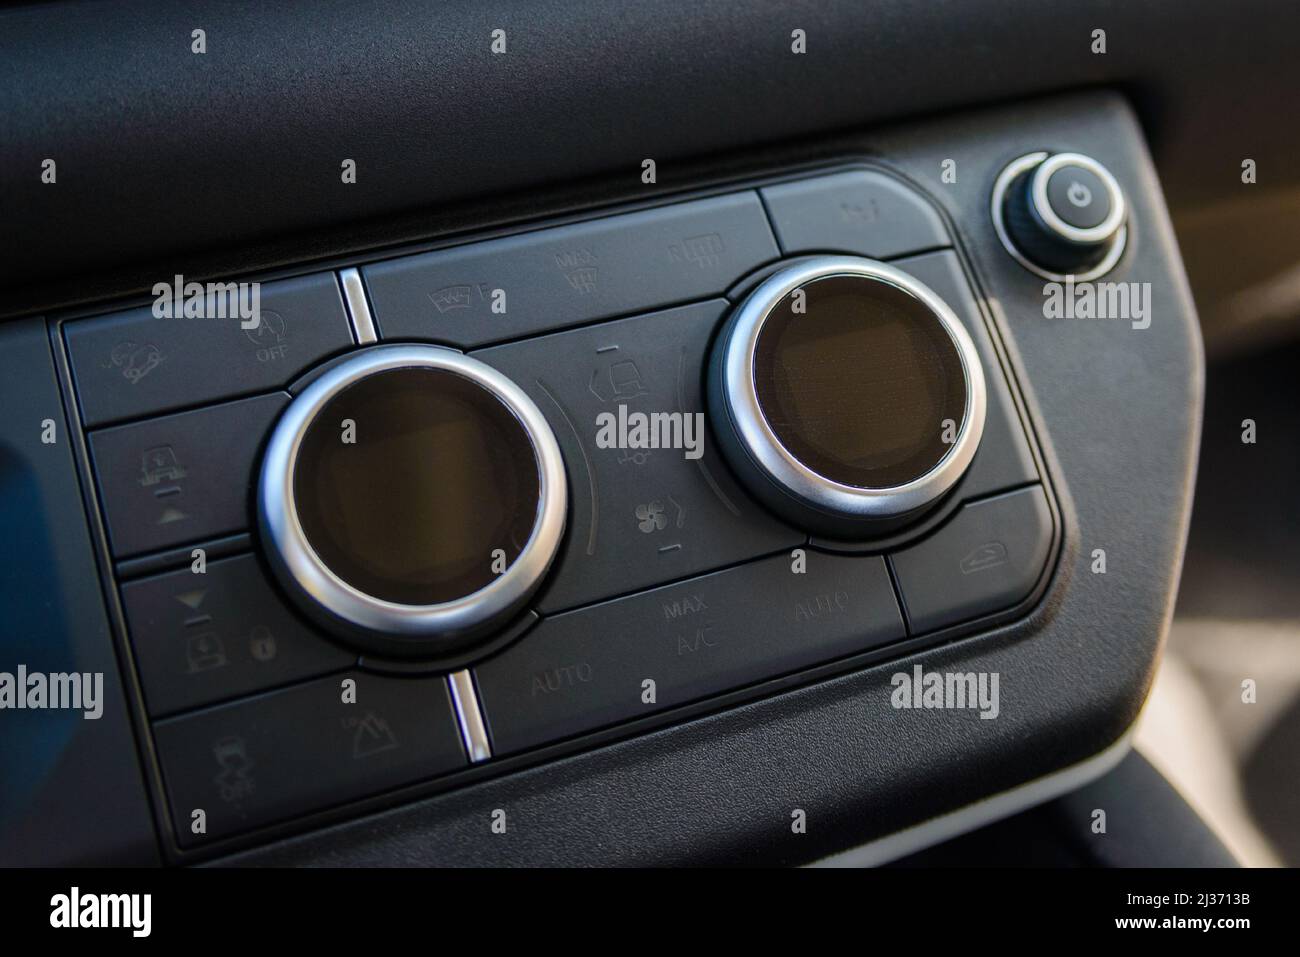 Russia, Rostovskaya oblast, 2021 June 09: Offroad and climate dashboard of new Land Rover Defender. Four-wheel drive off-road SUV. Stock Photo